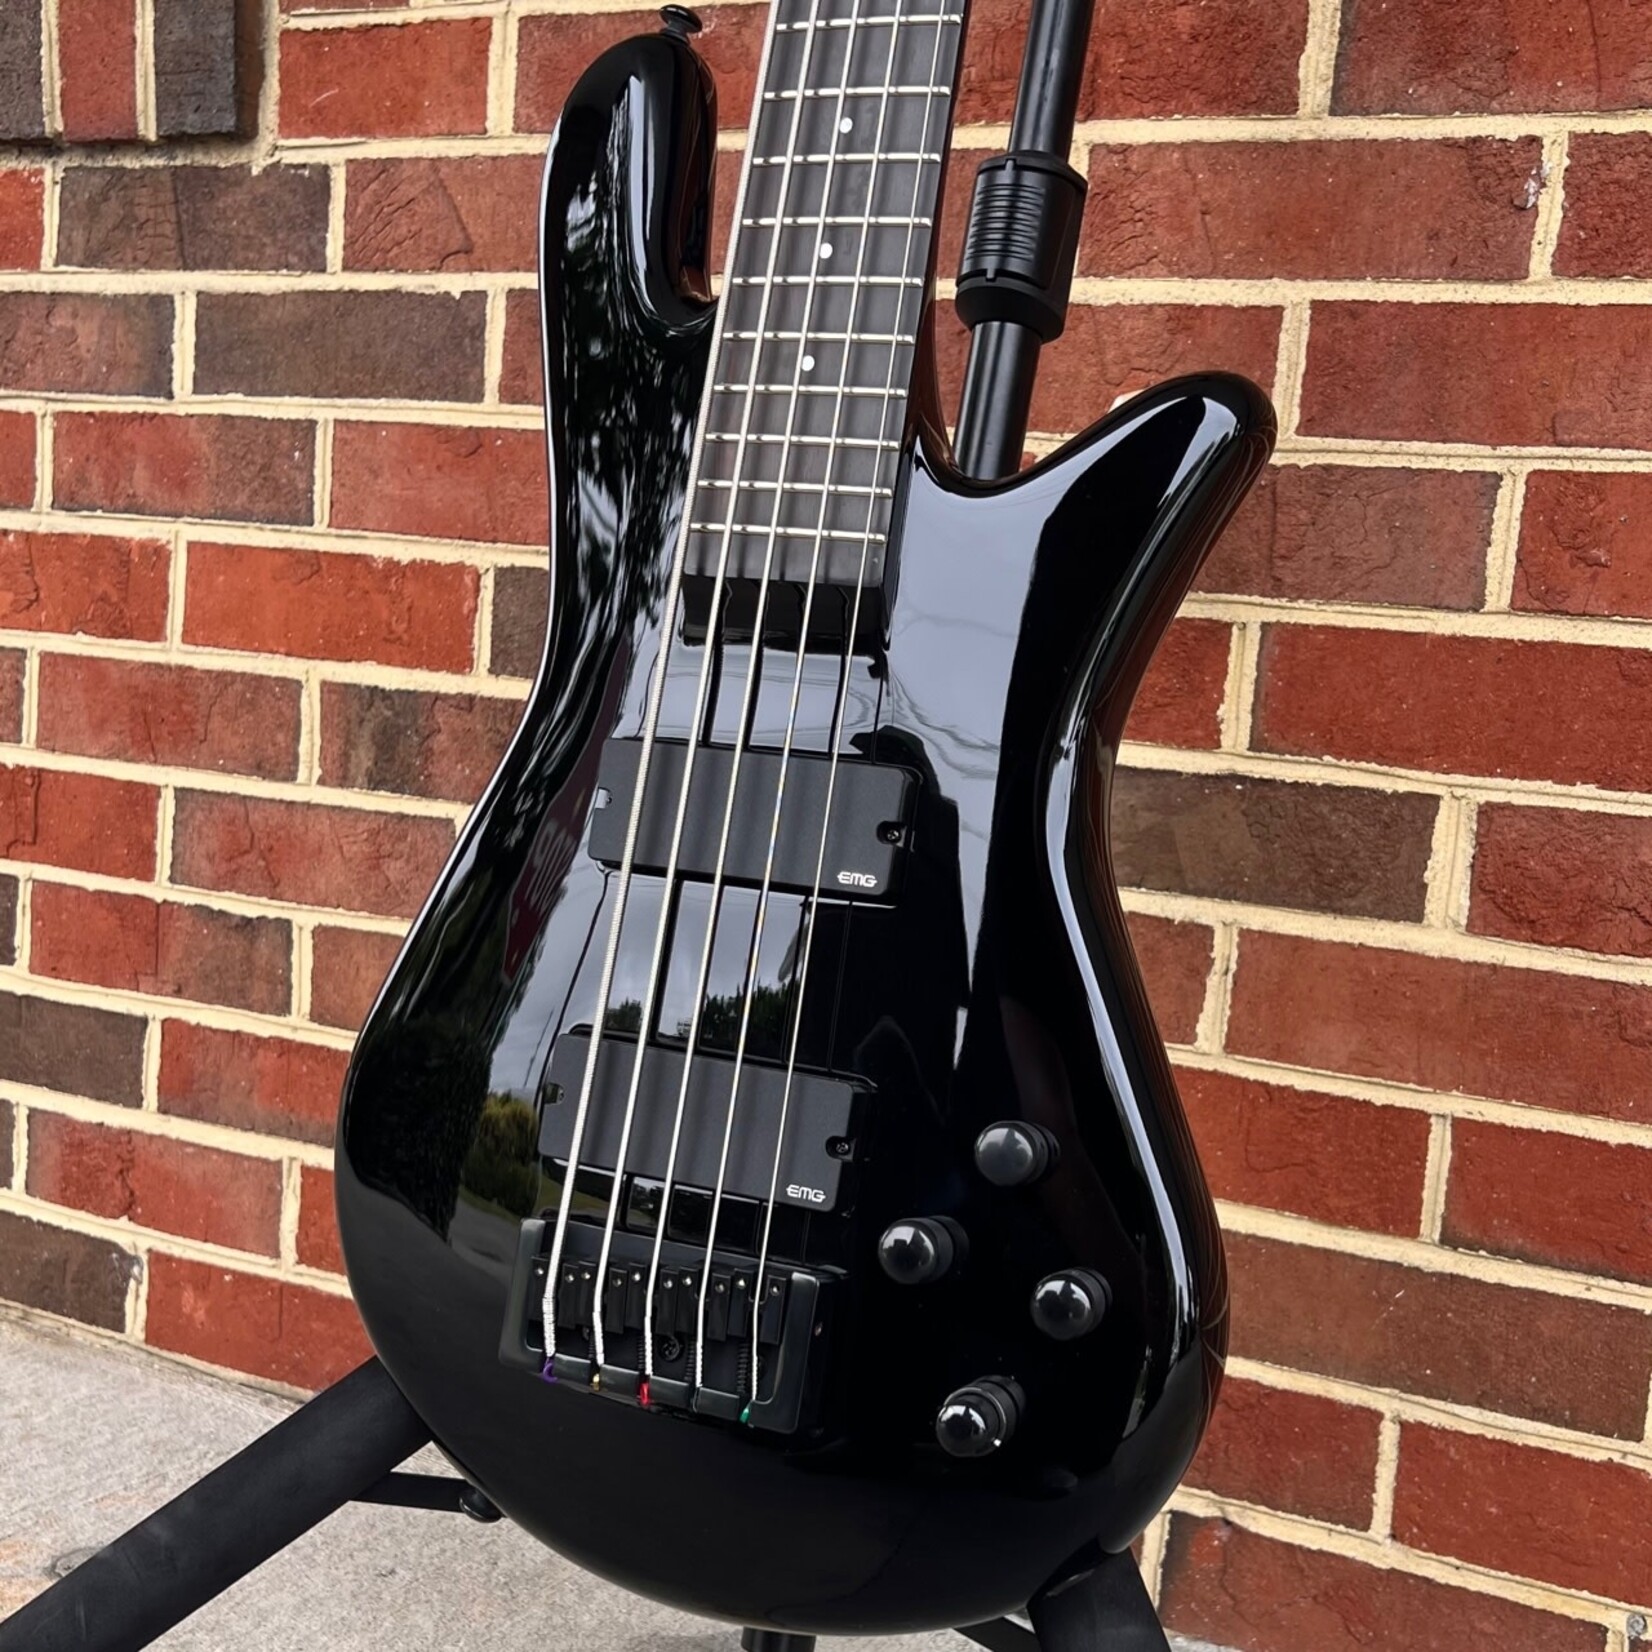 Spector Spector NS Ethos HP 5-String, Solid Black Gloss, EMG 40DC Pickups, Darkglass Tone Capsule, Gig Bag, SN# W231147